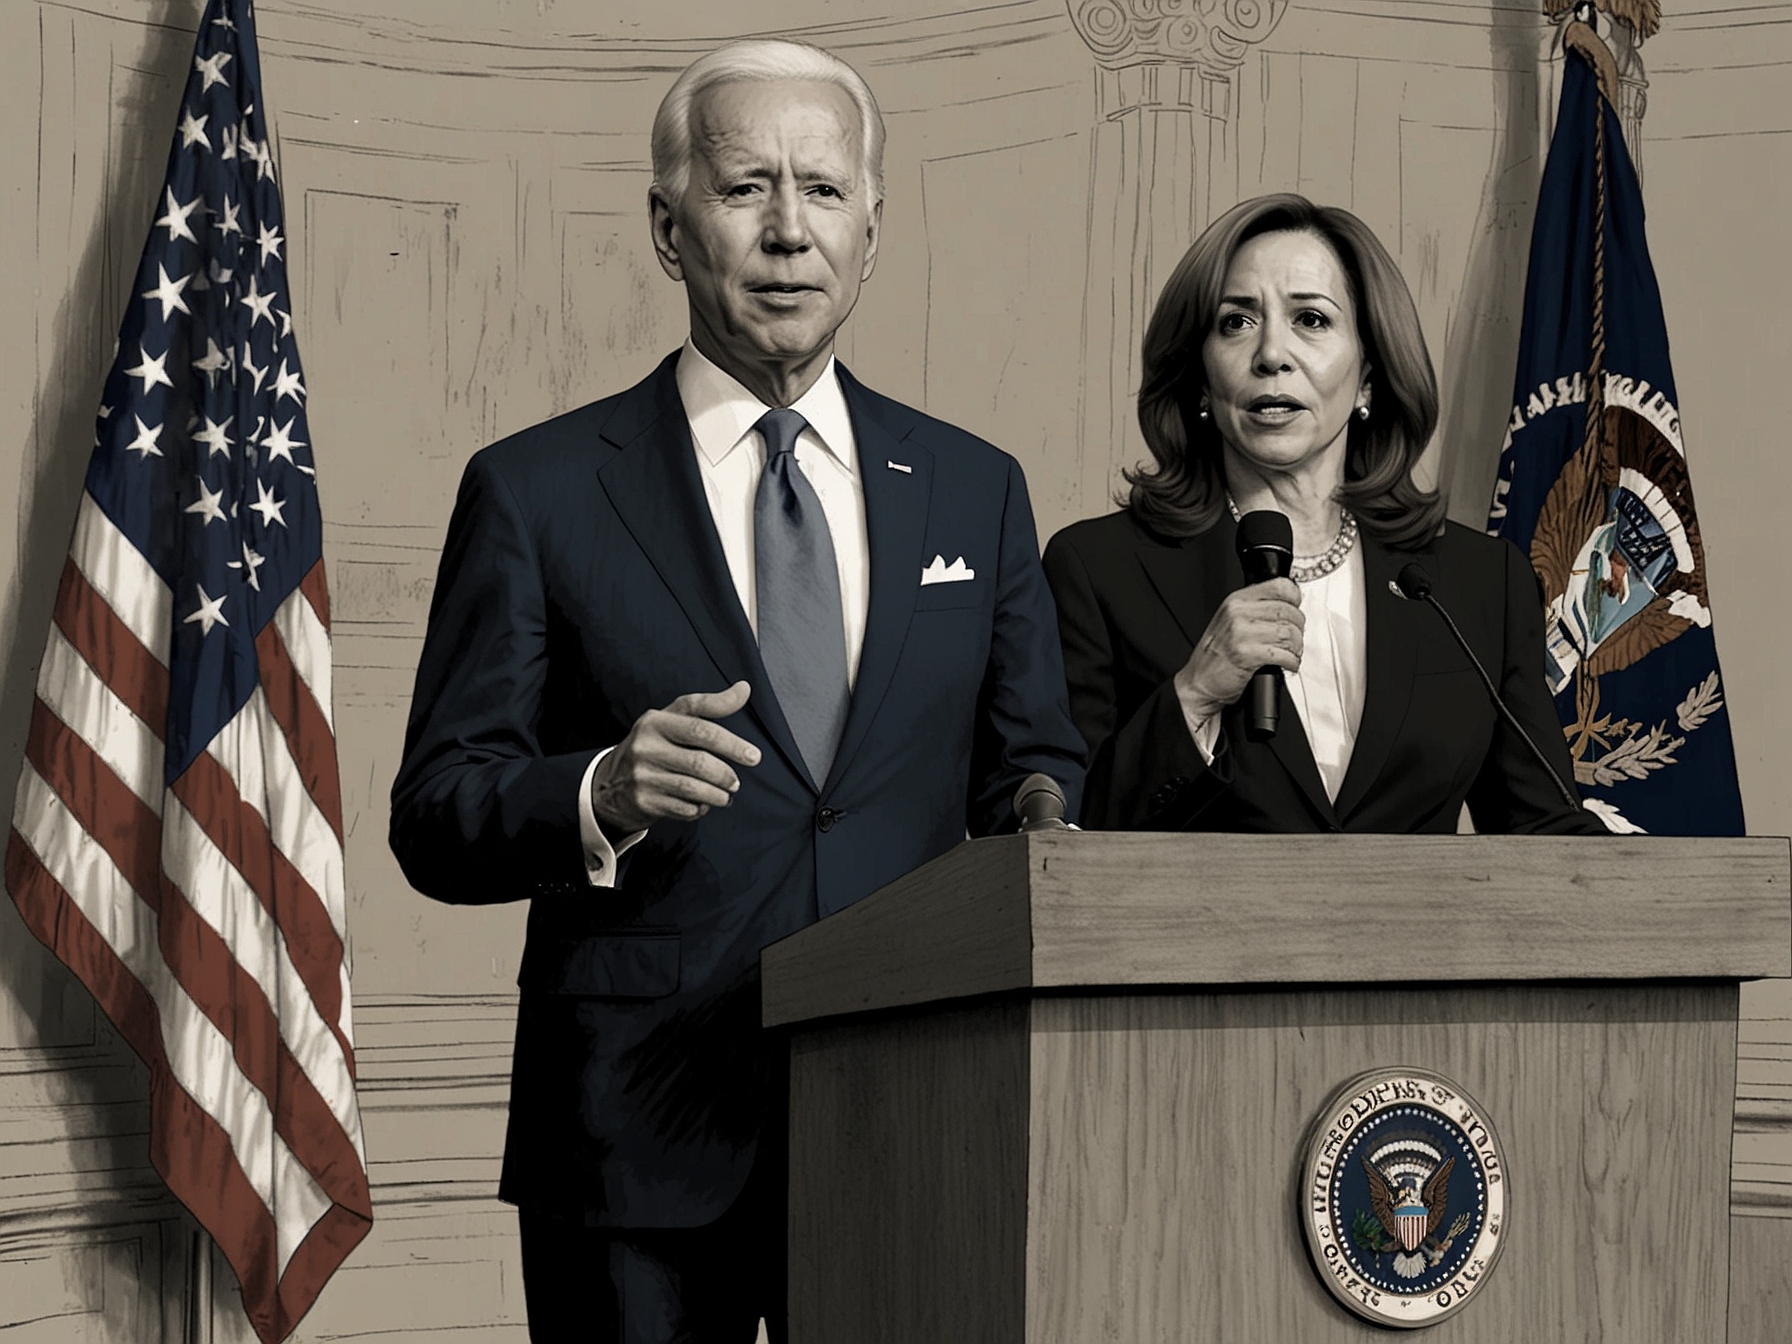 President Biden addressing the press, with Vice President Kamala Harris standing close by, illustrating the critical support needed from his VP to strengthen their campaign and regain public trust.